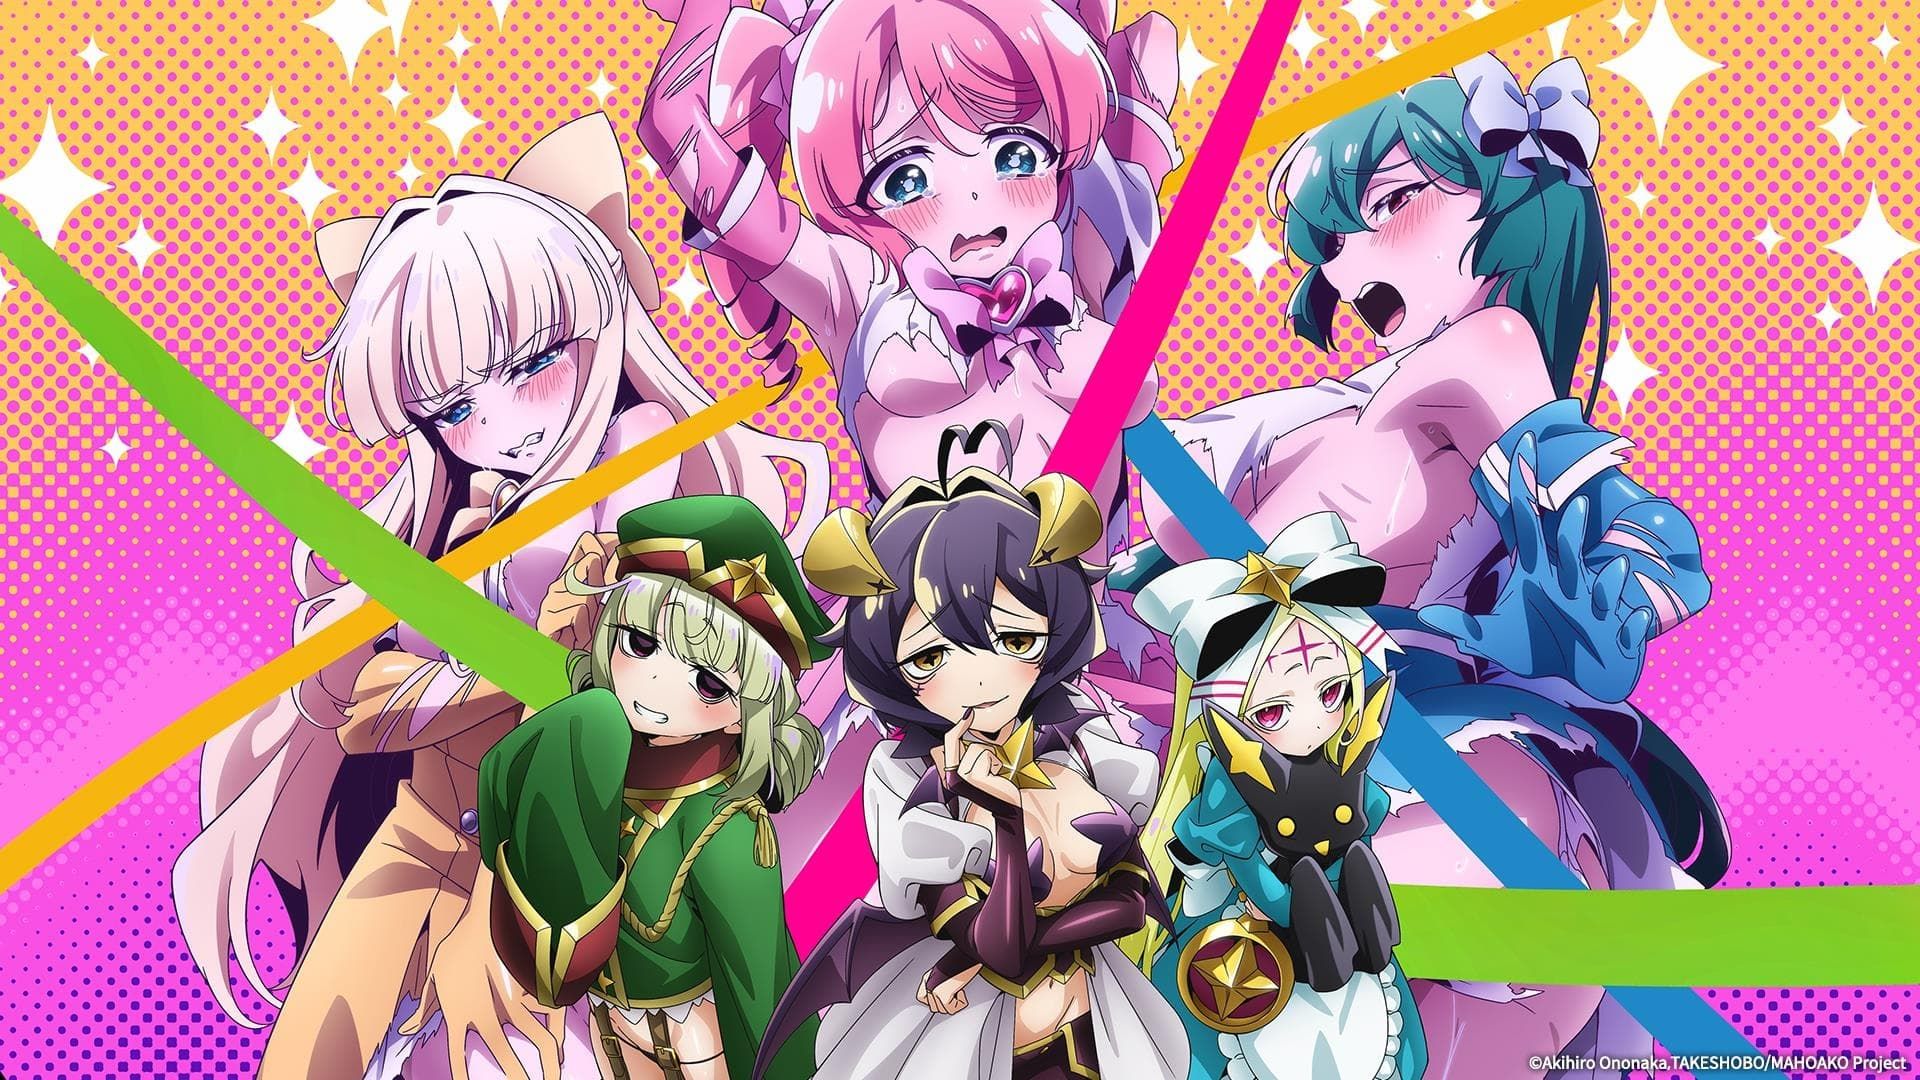 Gushing Over Magical Girls background